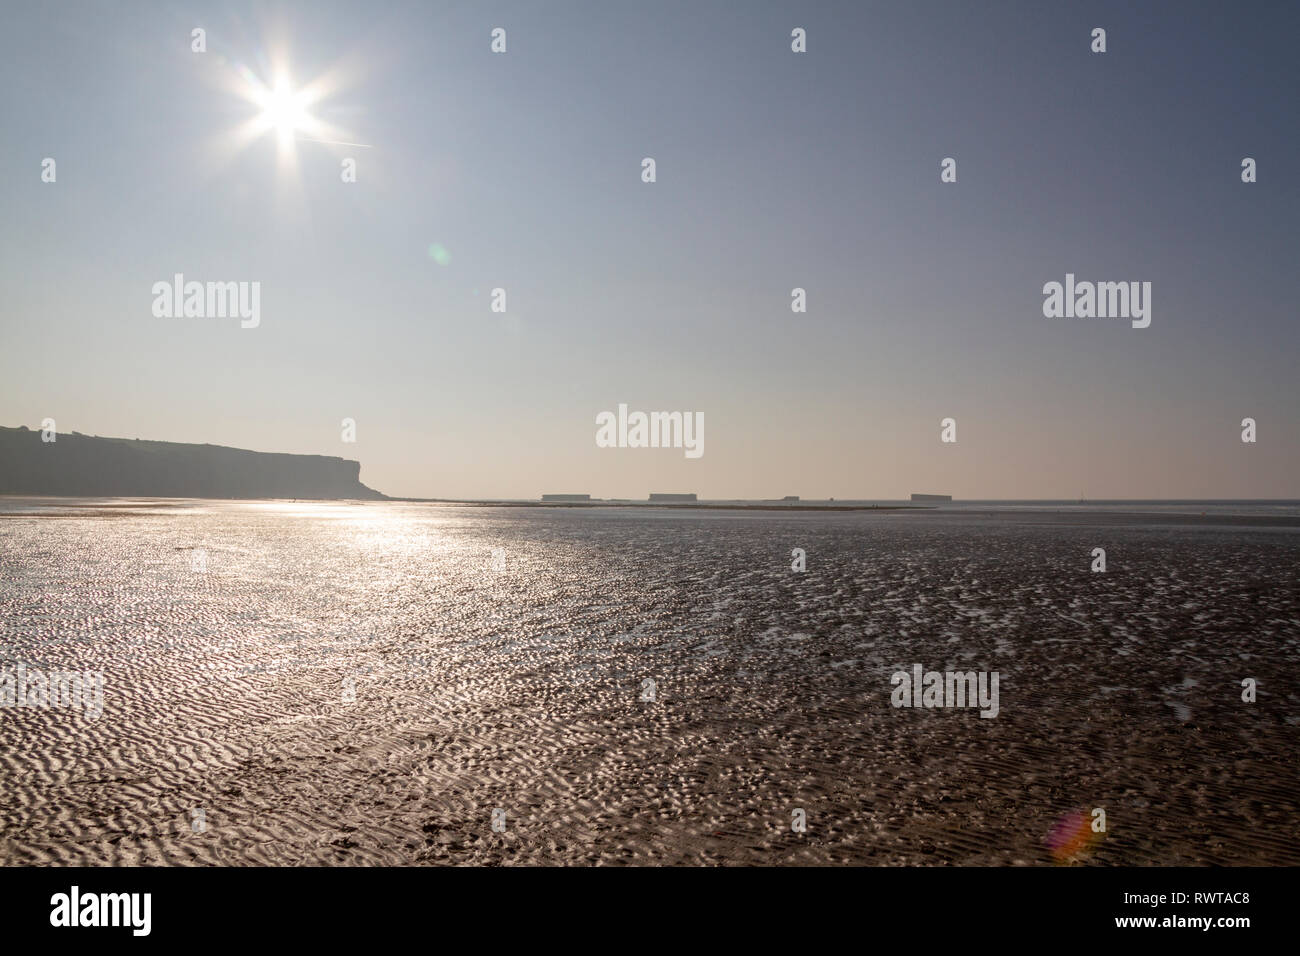 View Across The Beach At Low Tide On A Bright Evening On The